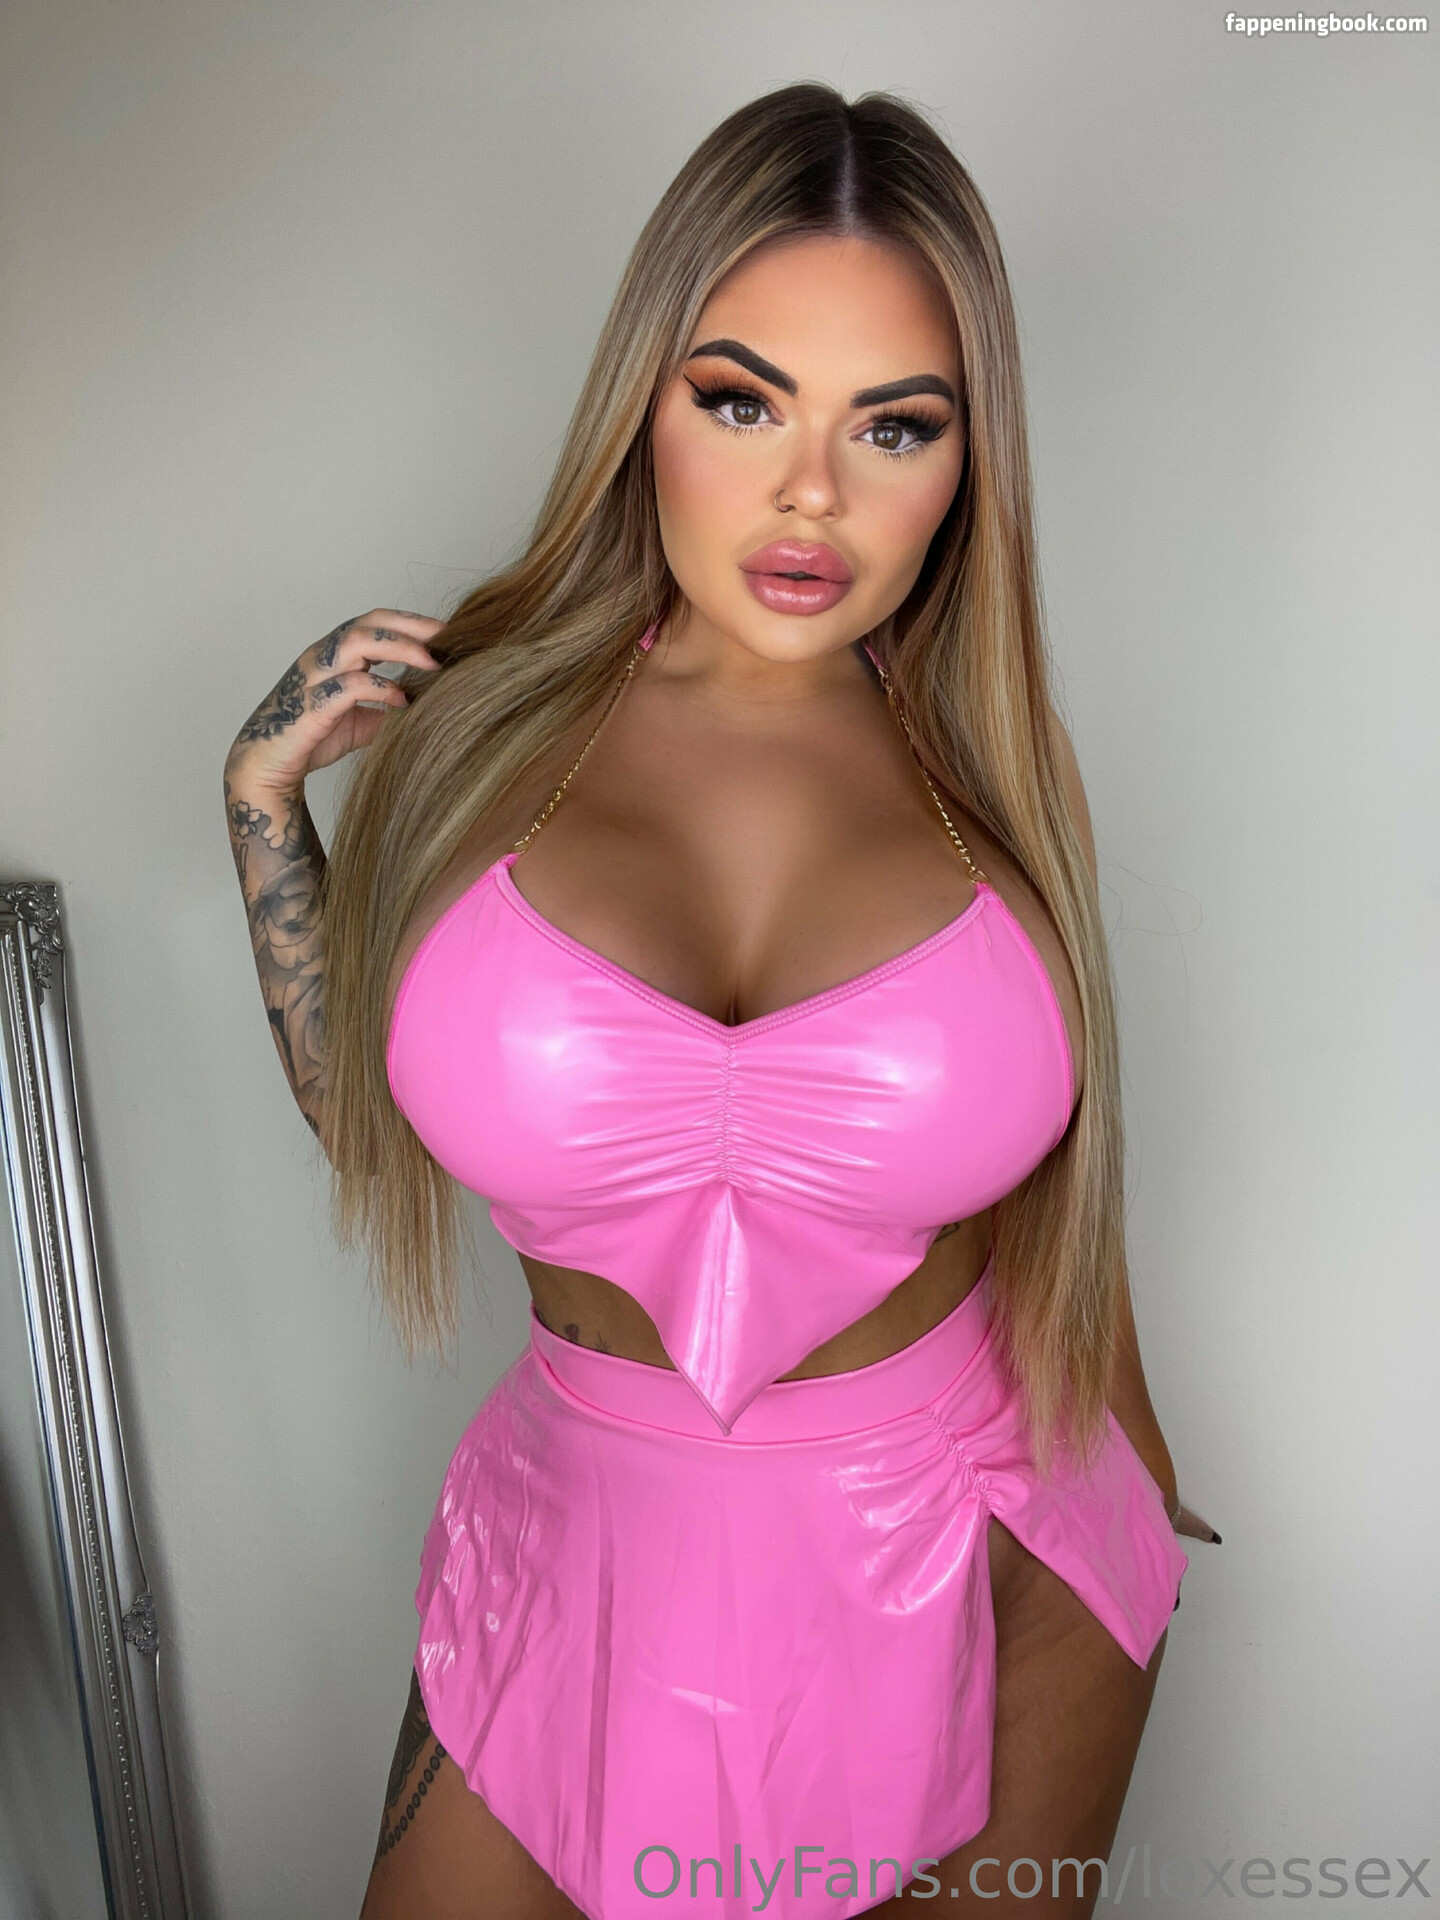 darcy_xox Nude OnlyFans Leaks